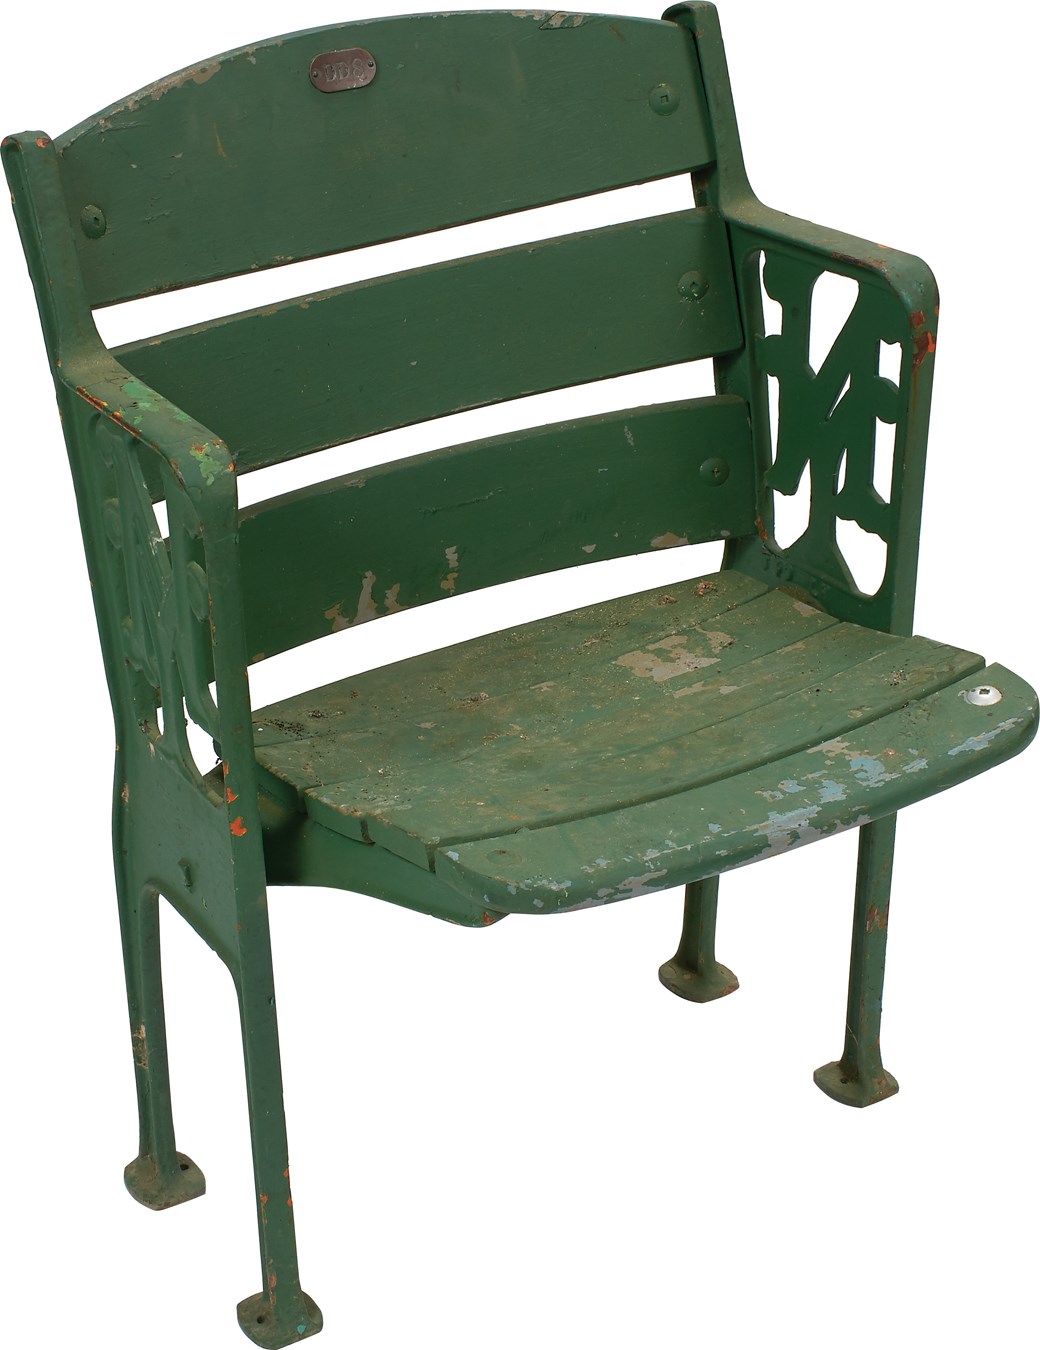 Stadium Artifacts - Polo Grounds Seat with Double Figural Sides